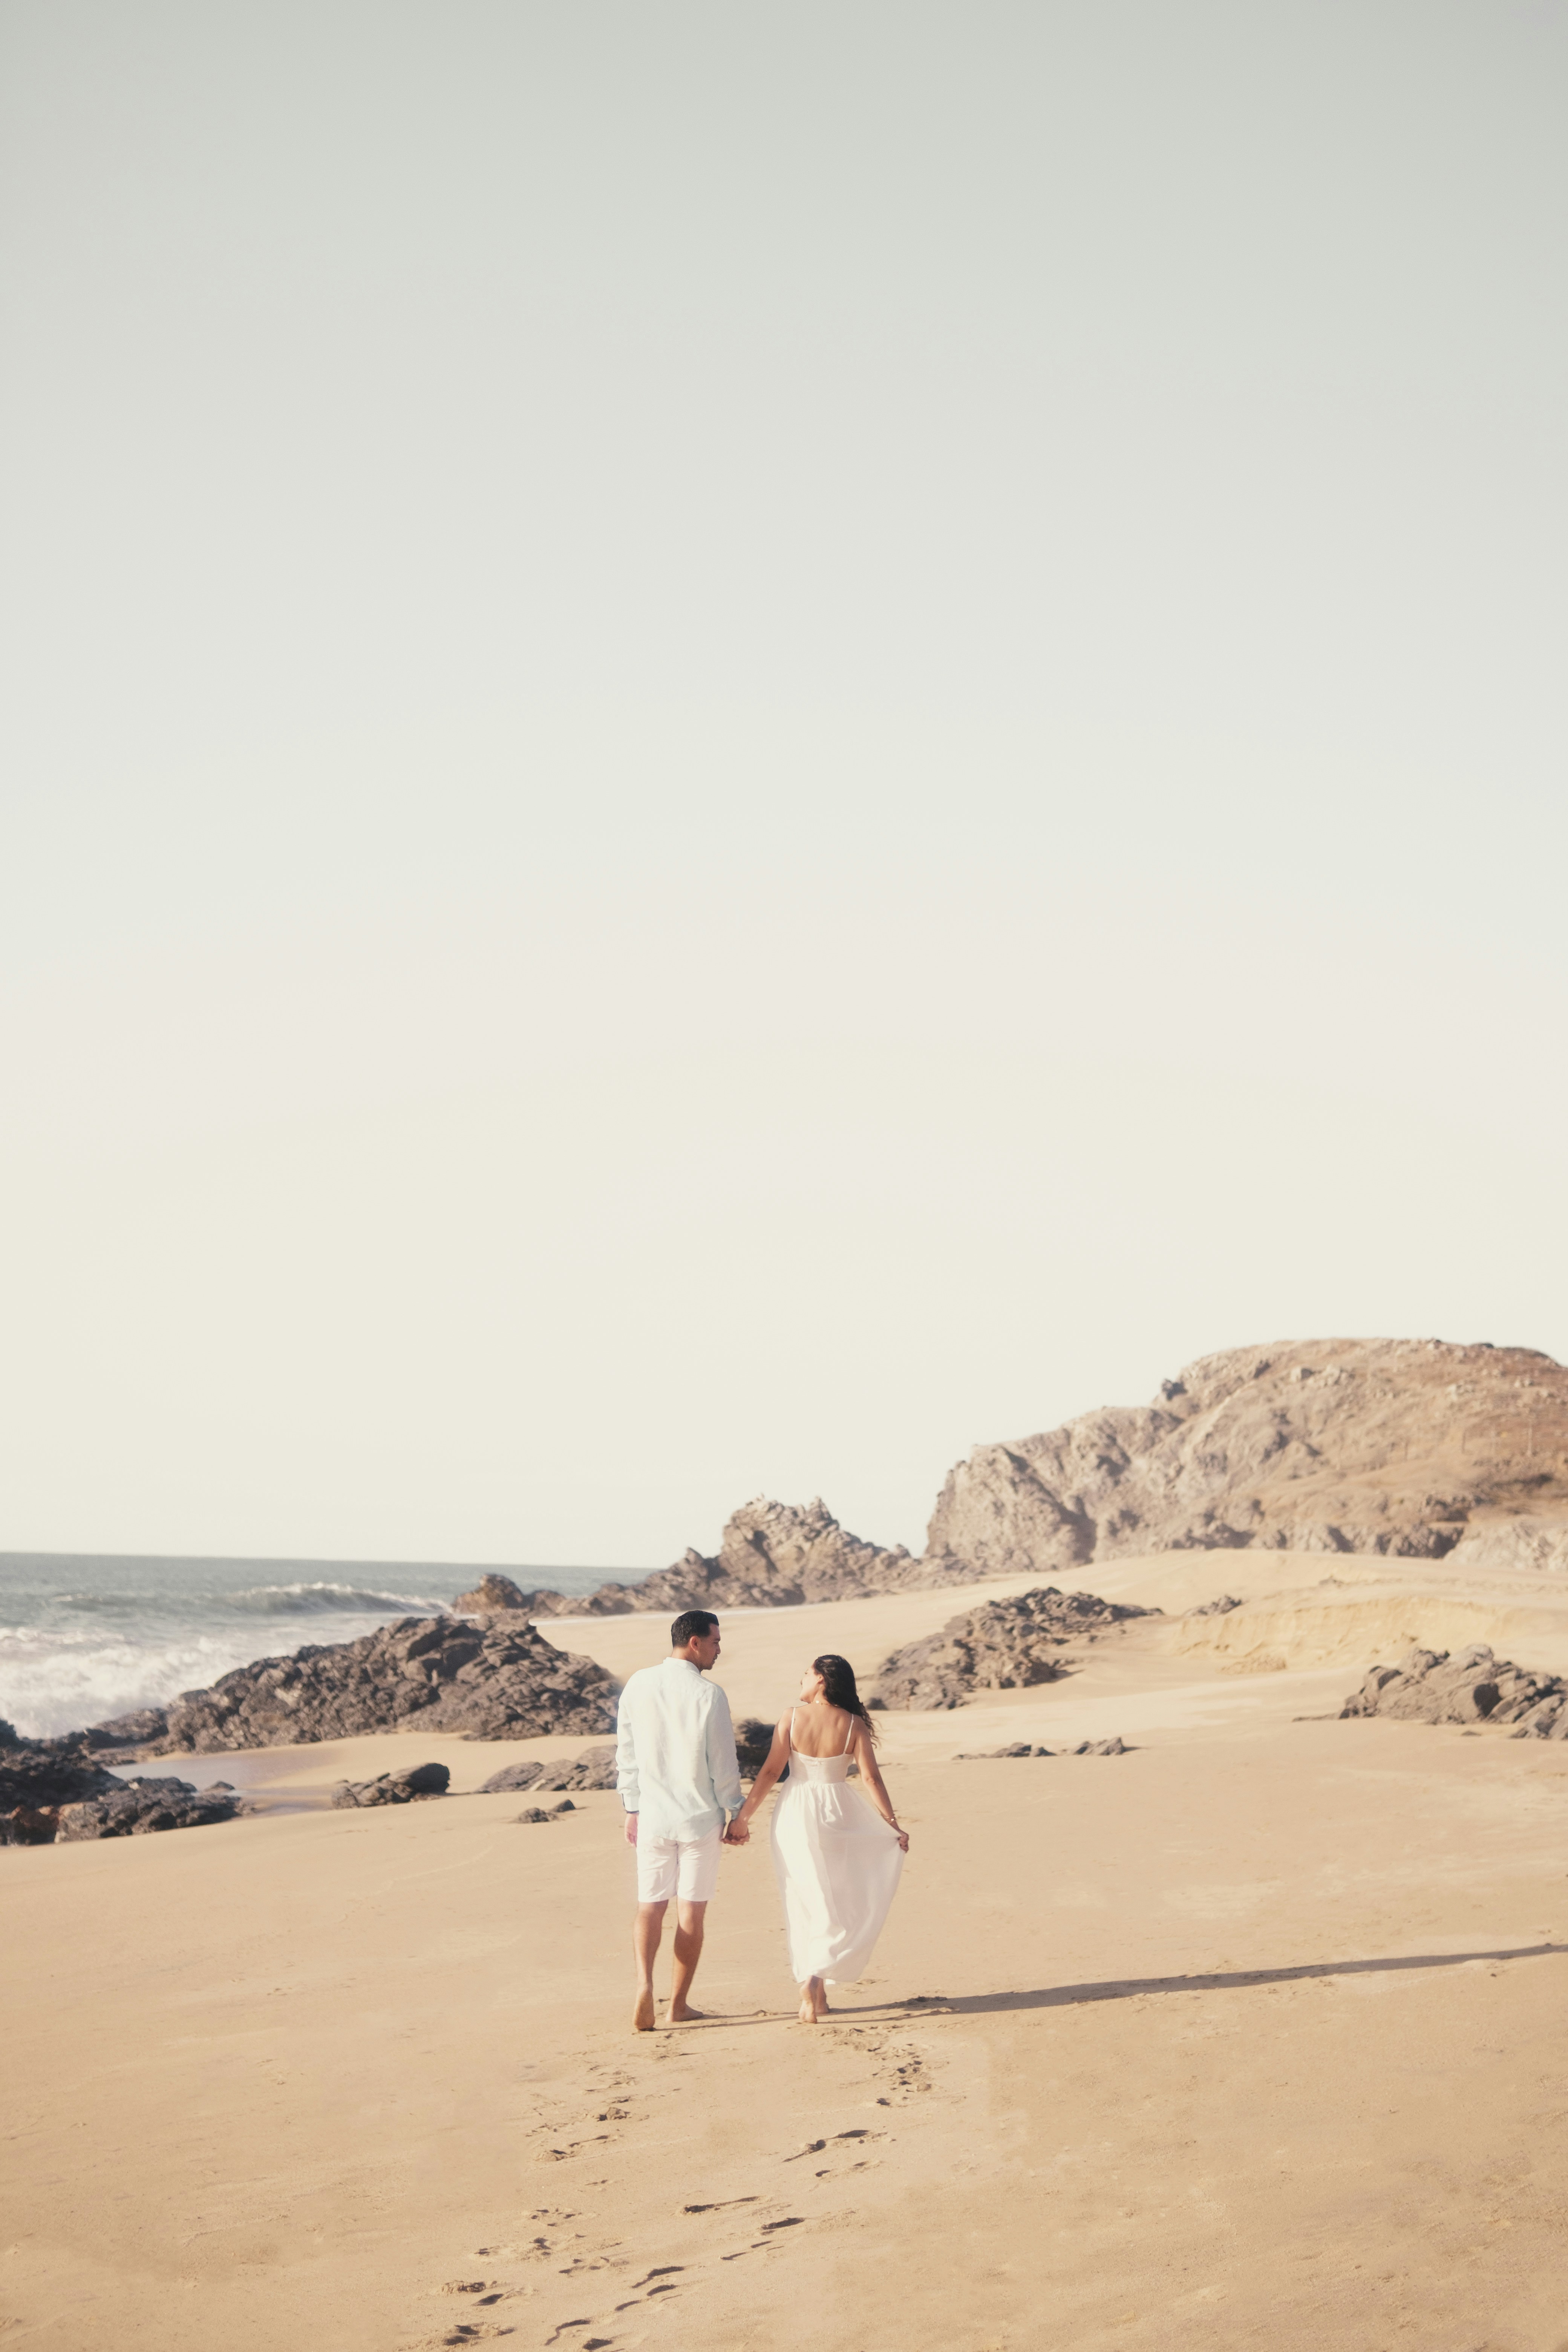 great photo recipe,how to photograph a man and woman walking on a beach